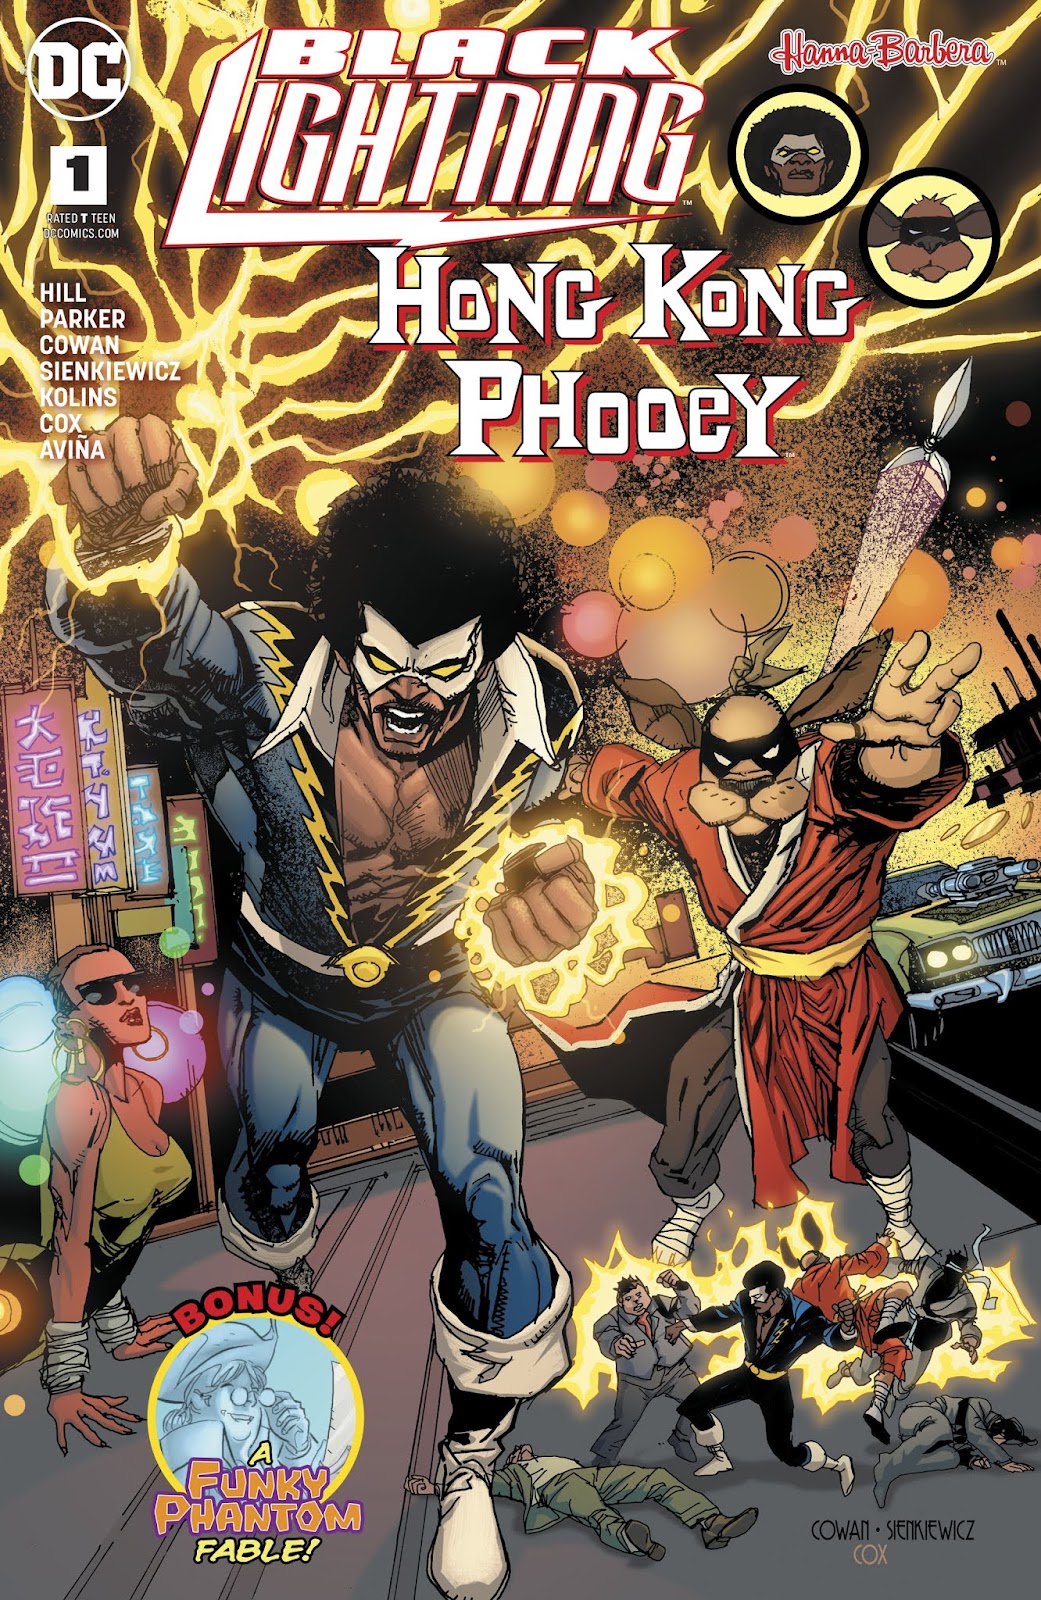 DC Meets Hanna-Barbera issue Issue Black Lightning - Hong Kong PHOOEY - Page 1